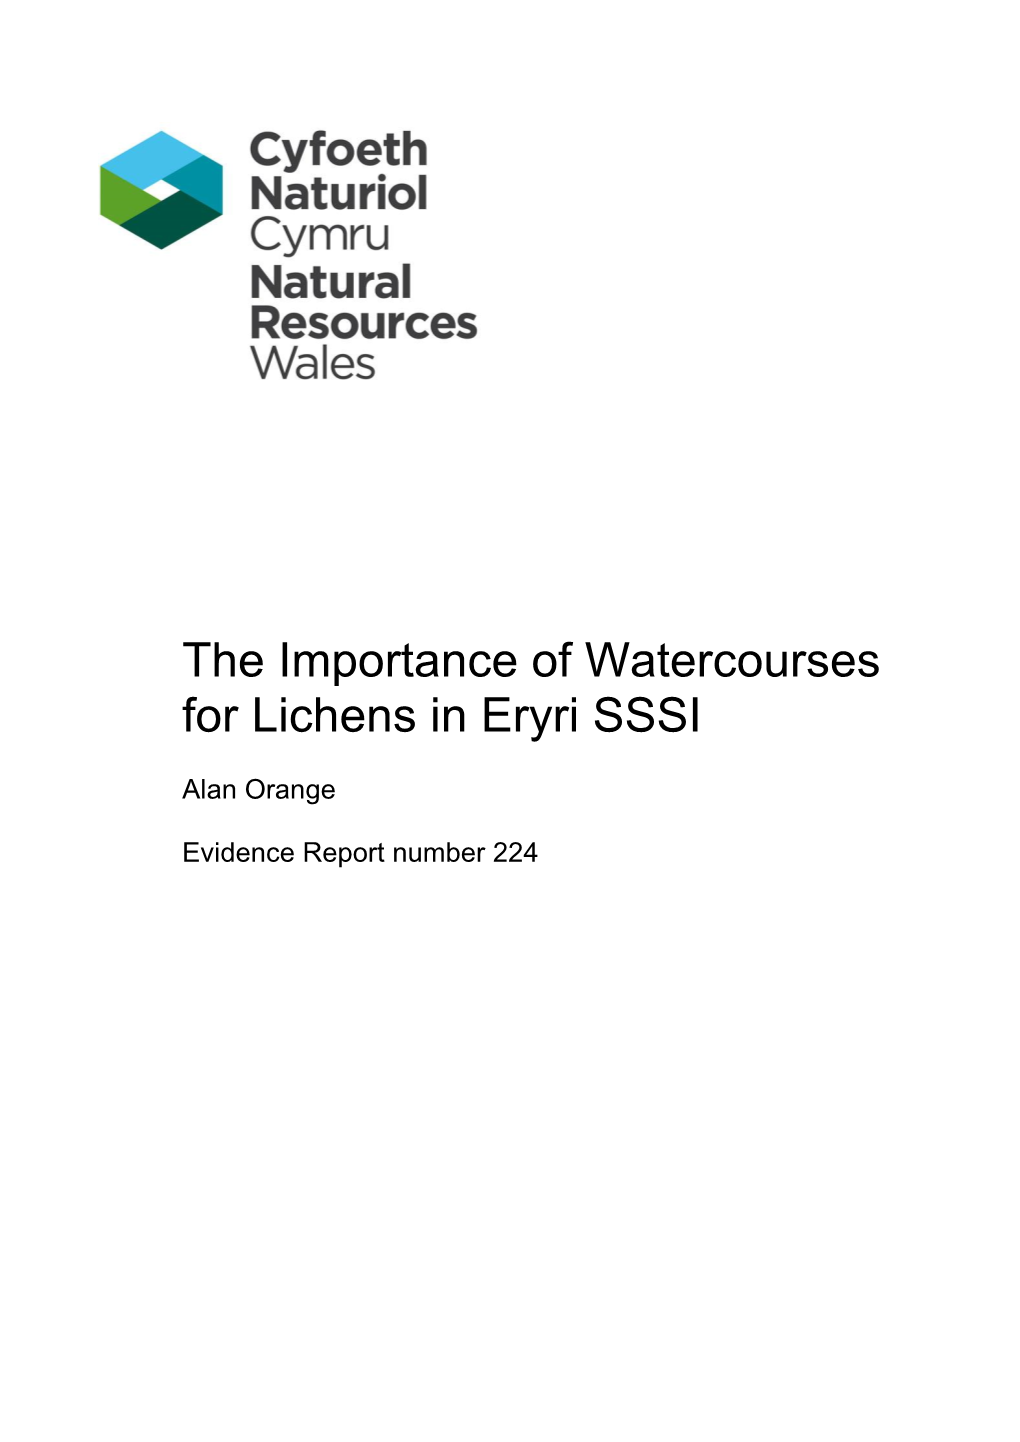 The Importance of Watercourses for Lichens in Eryri SSSI